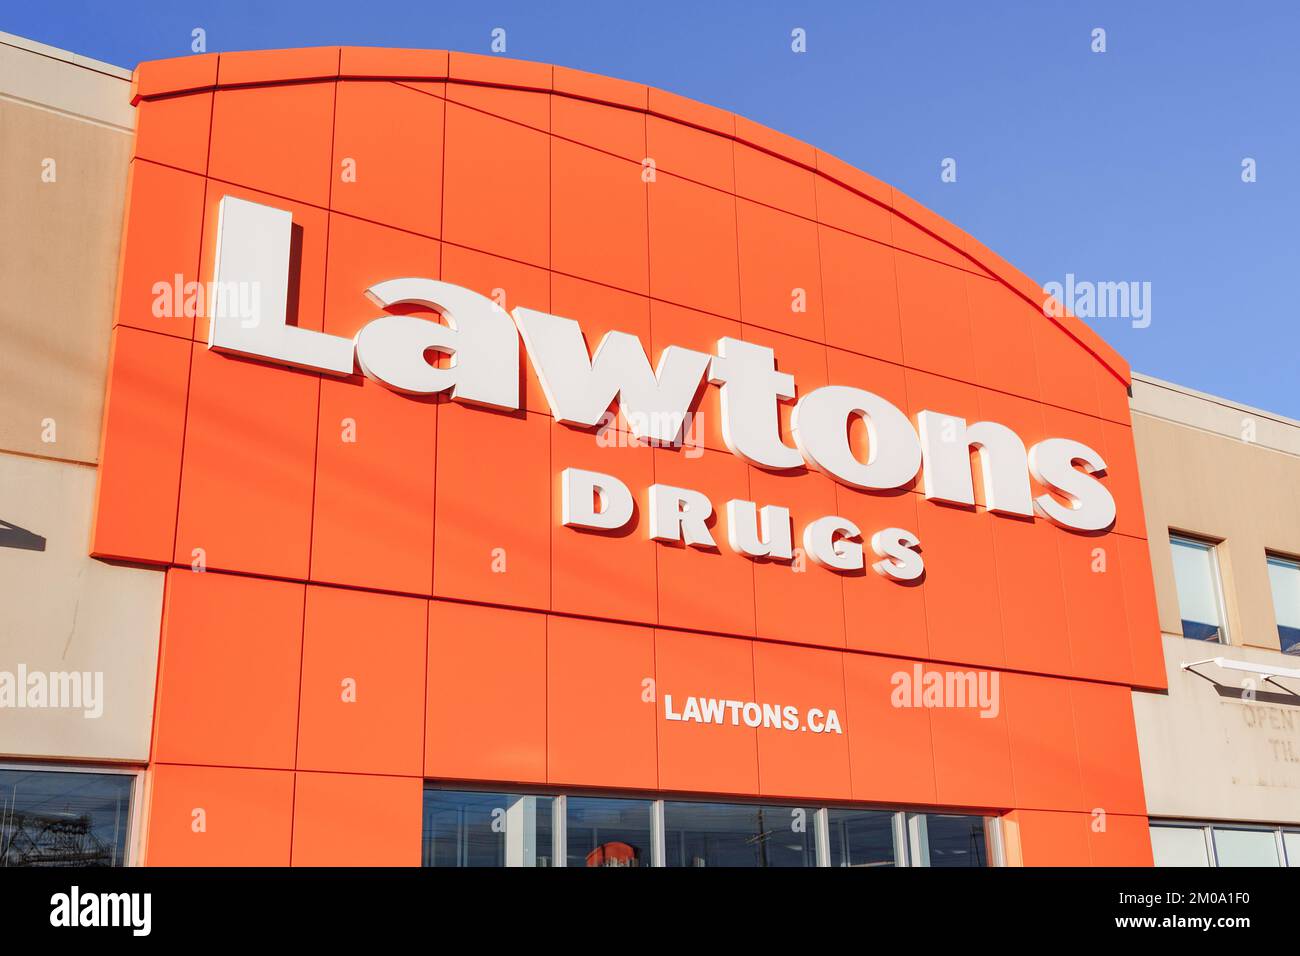 Truro, Canada - December 4, 2022: Lawtons is a Canadian drug store chain owned by Sobeys and has over 67 locations across Atlantic Canada. Stock Photo